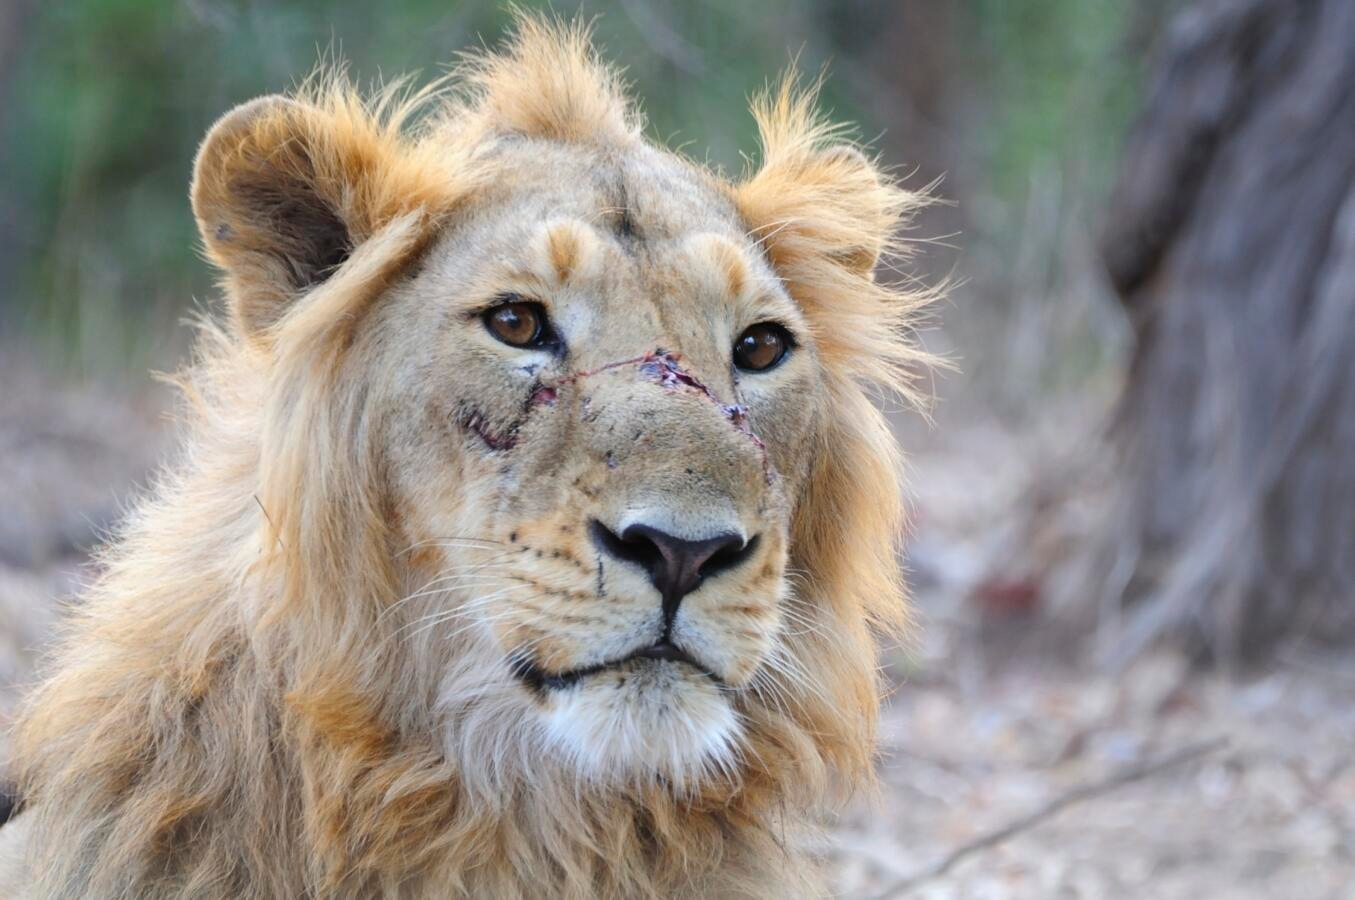 Photo of a lion with a scar on its face.